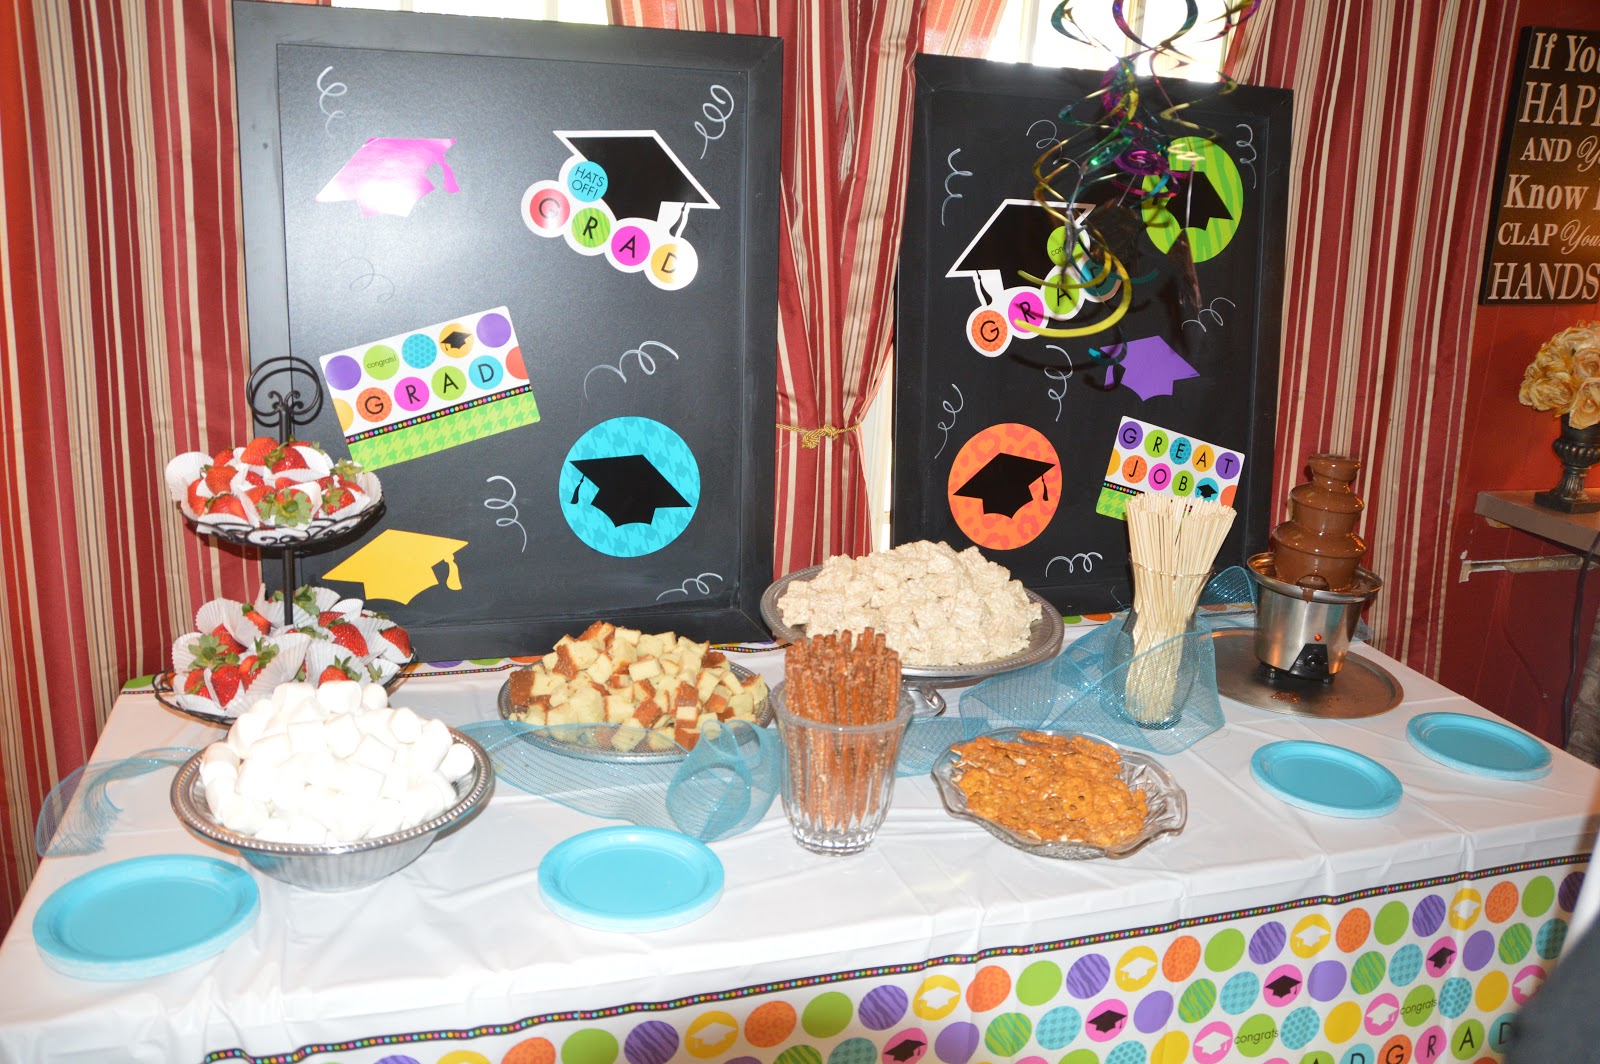 Best Graduation Party Ideas to Make Your Party More Fun